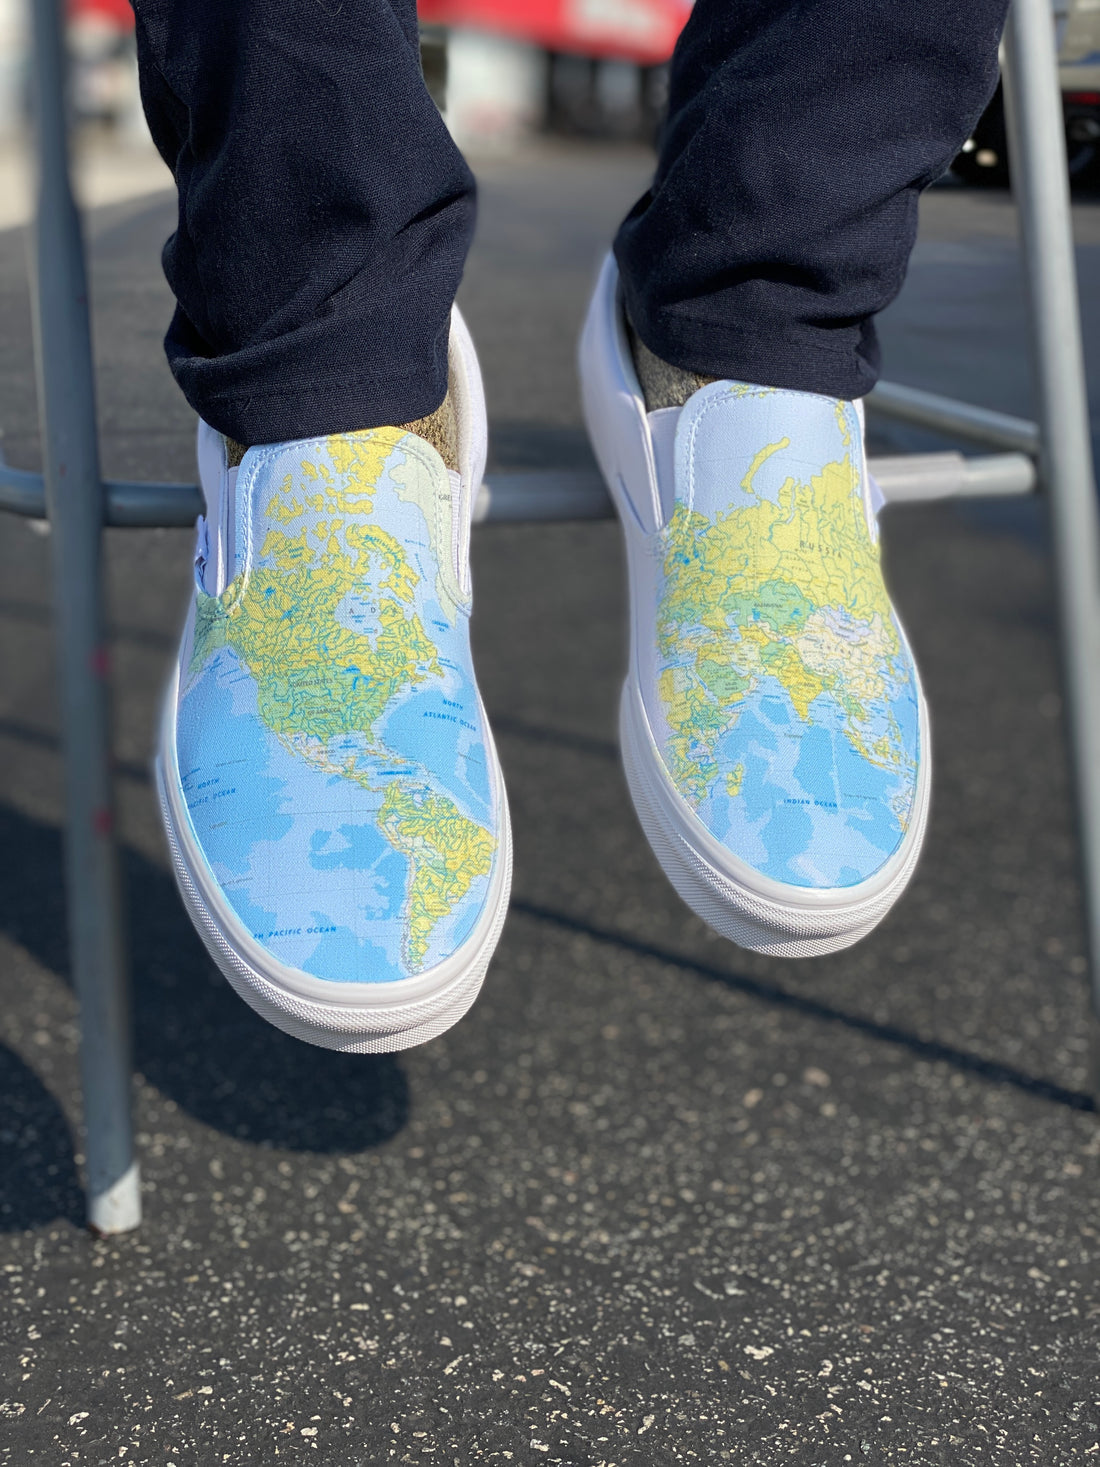 Best Gift for Geography Fanatics and World Travelers! - World Map Slip On Vans